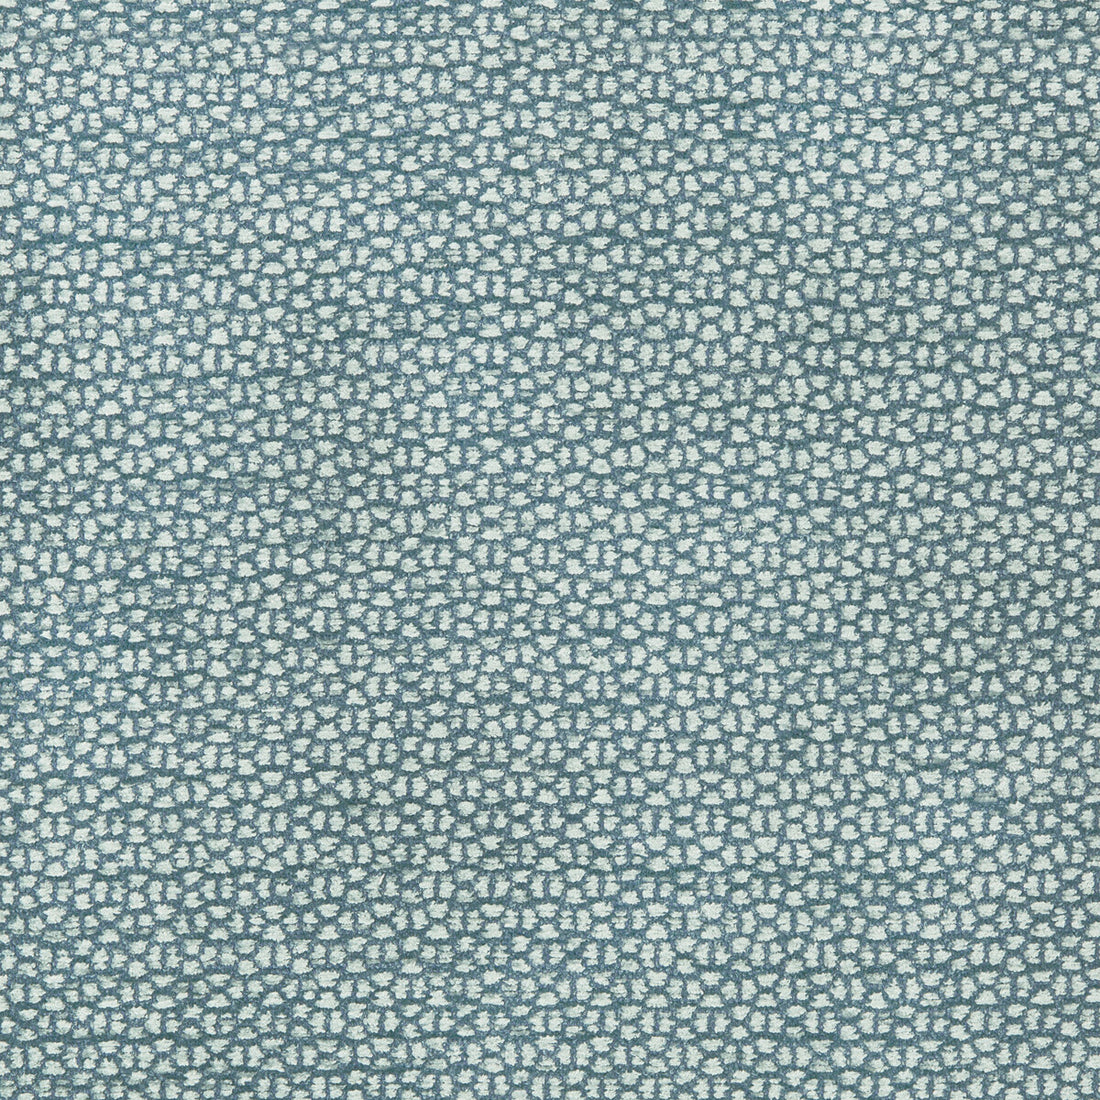 Marolay Texture fabric in aqua color - pattern 8019144.13.0 - by Brunschwig &amp; Fils in the Chambery Textures II collection